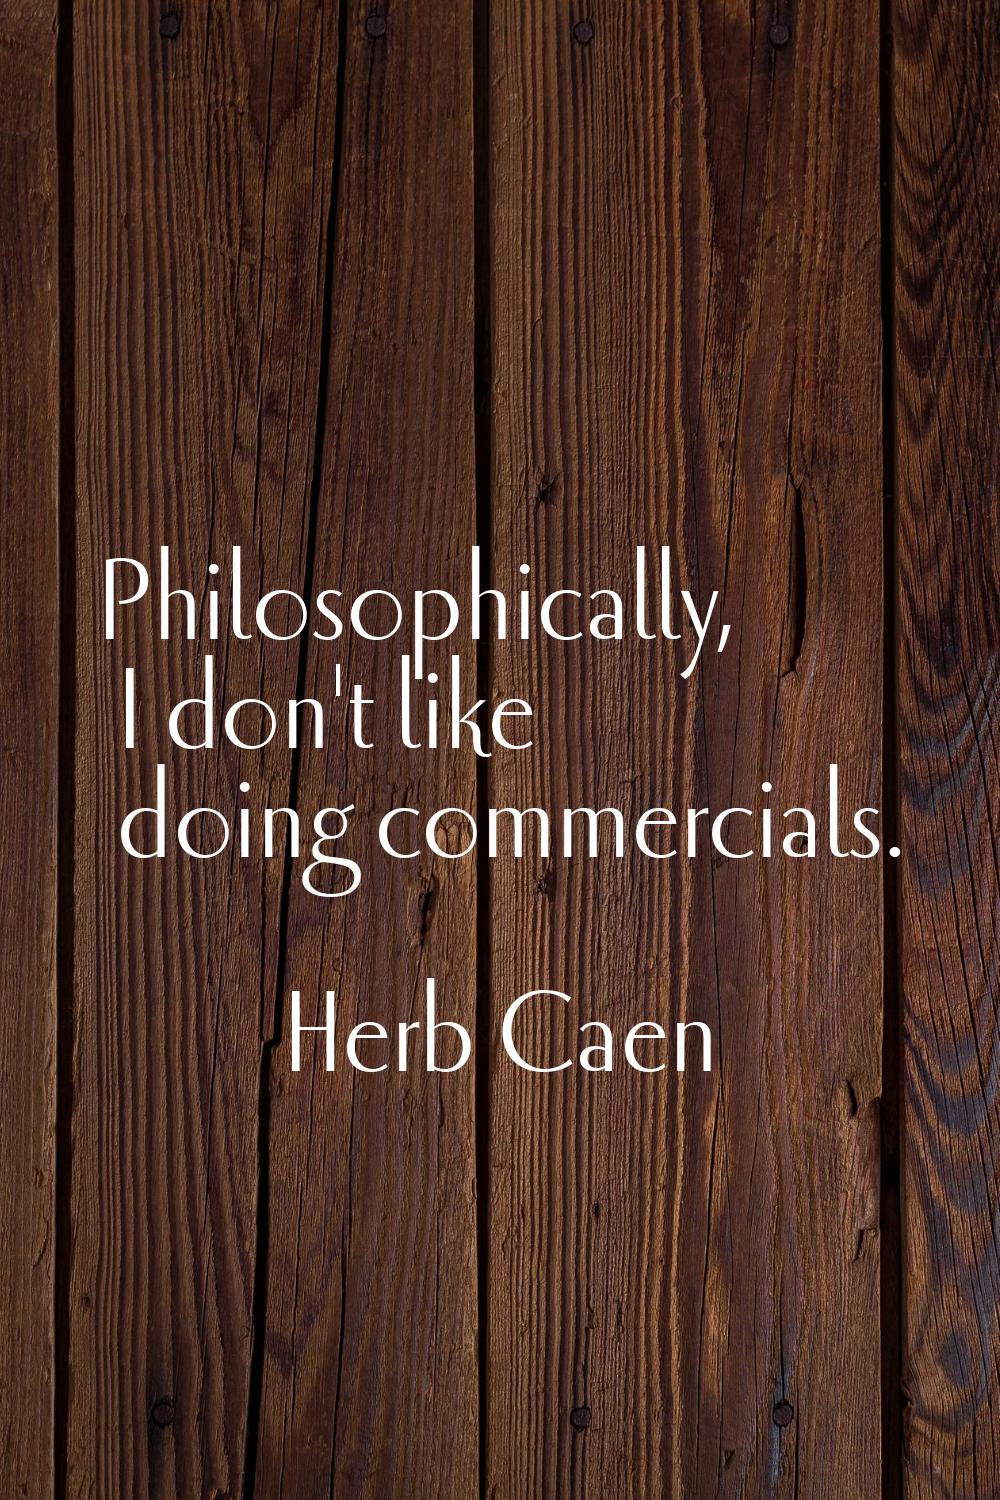 Philosophically, I don't like doing commercials.